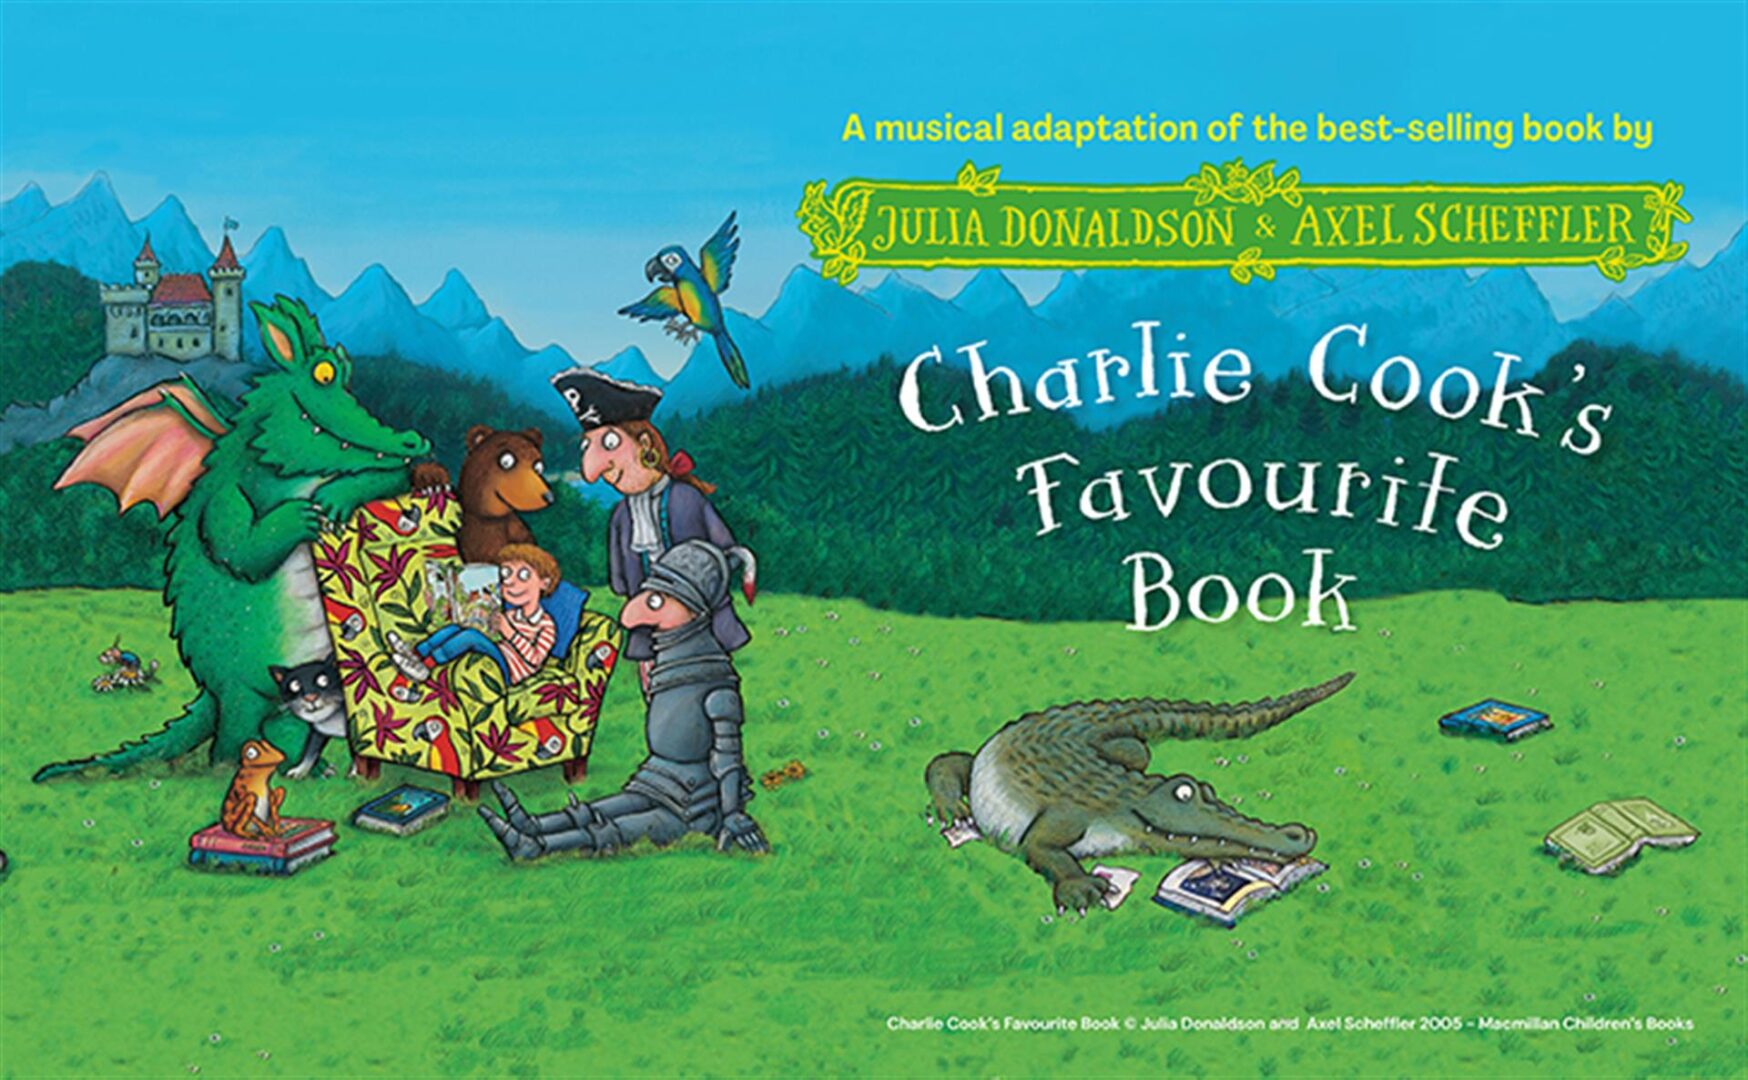  Charlie Cook’s Favourite Book